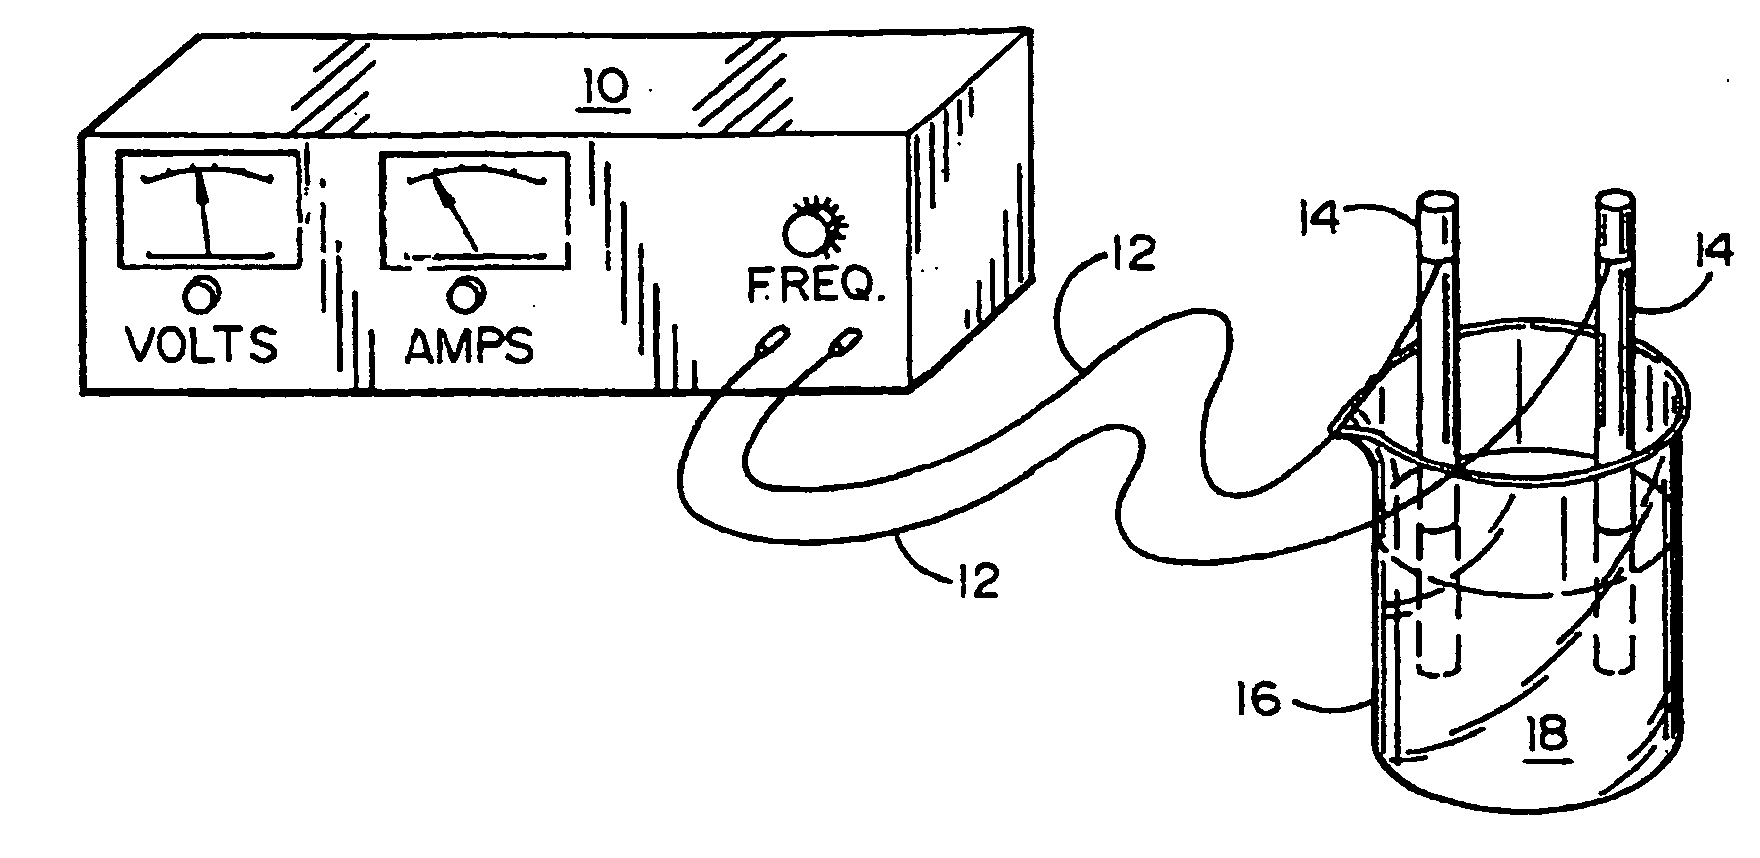 Method of providing cosmetic/medical therapy